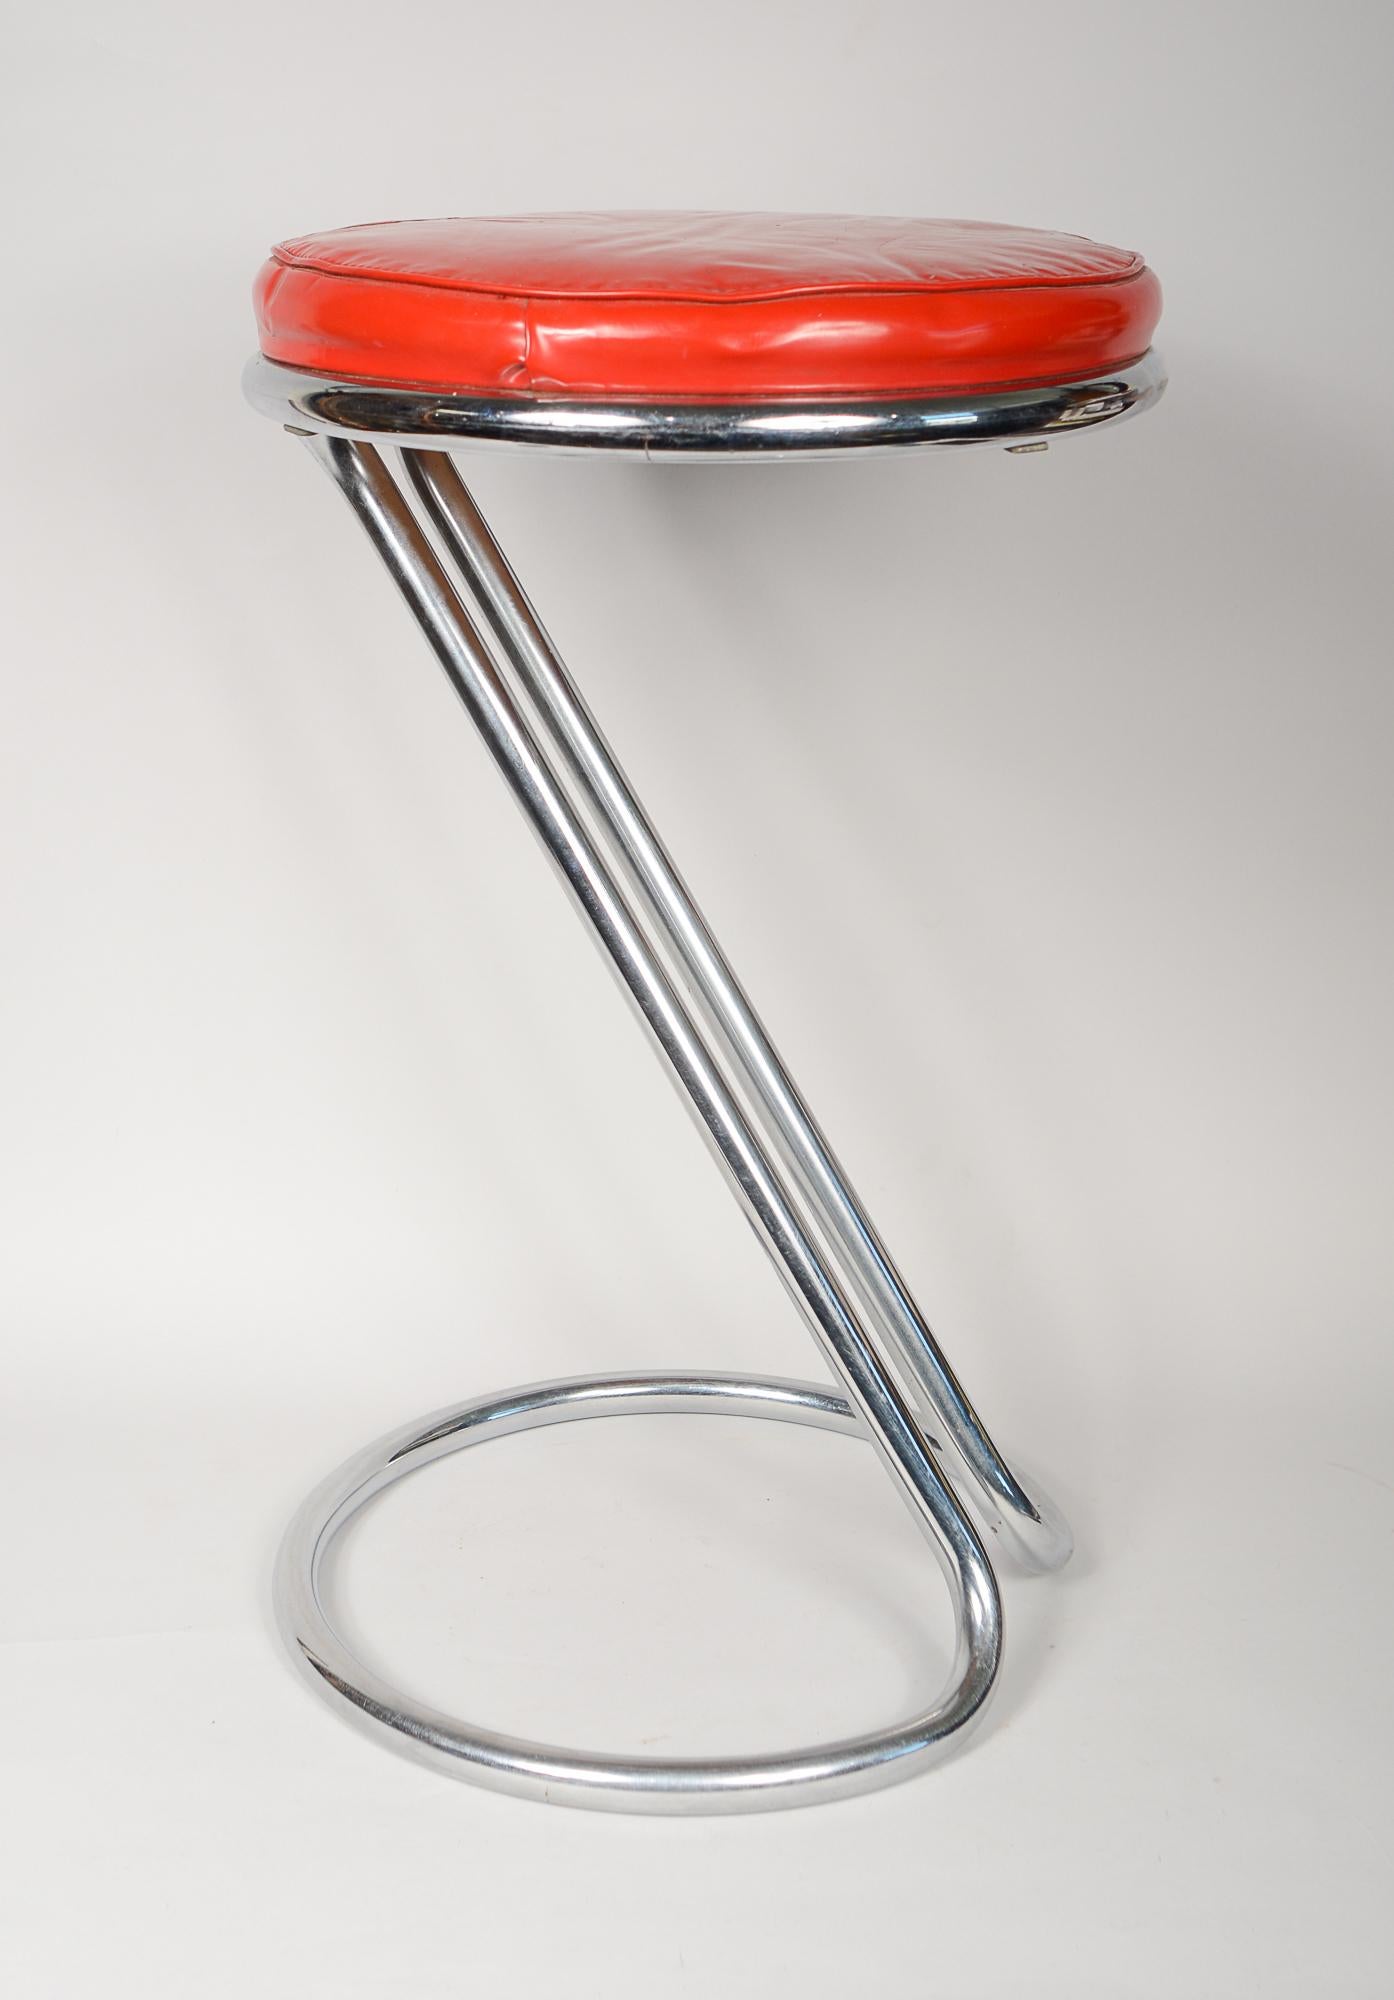 Z stool designed by Gilbert Rohde for Troy Sunshade Company. The stool is in original condition. The chrome shows a little surface wear. The original upholstery has a tear repaired with tape.